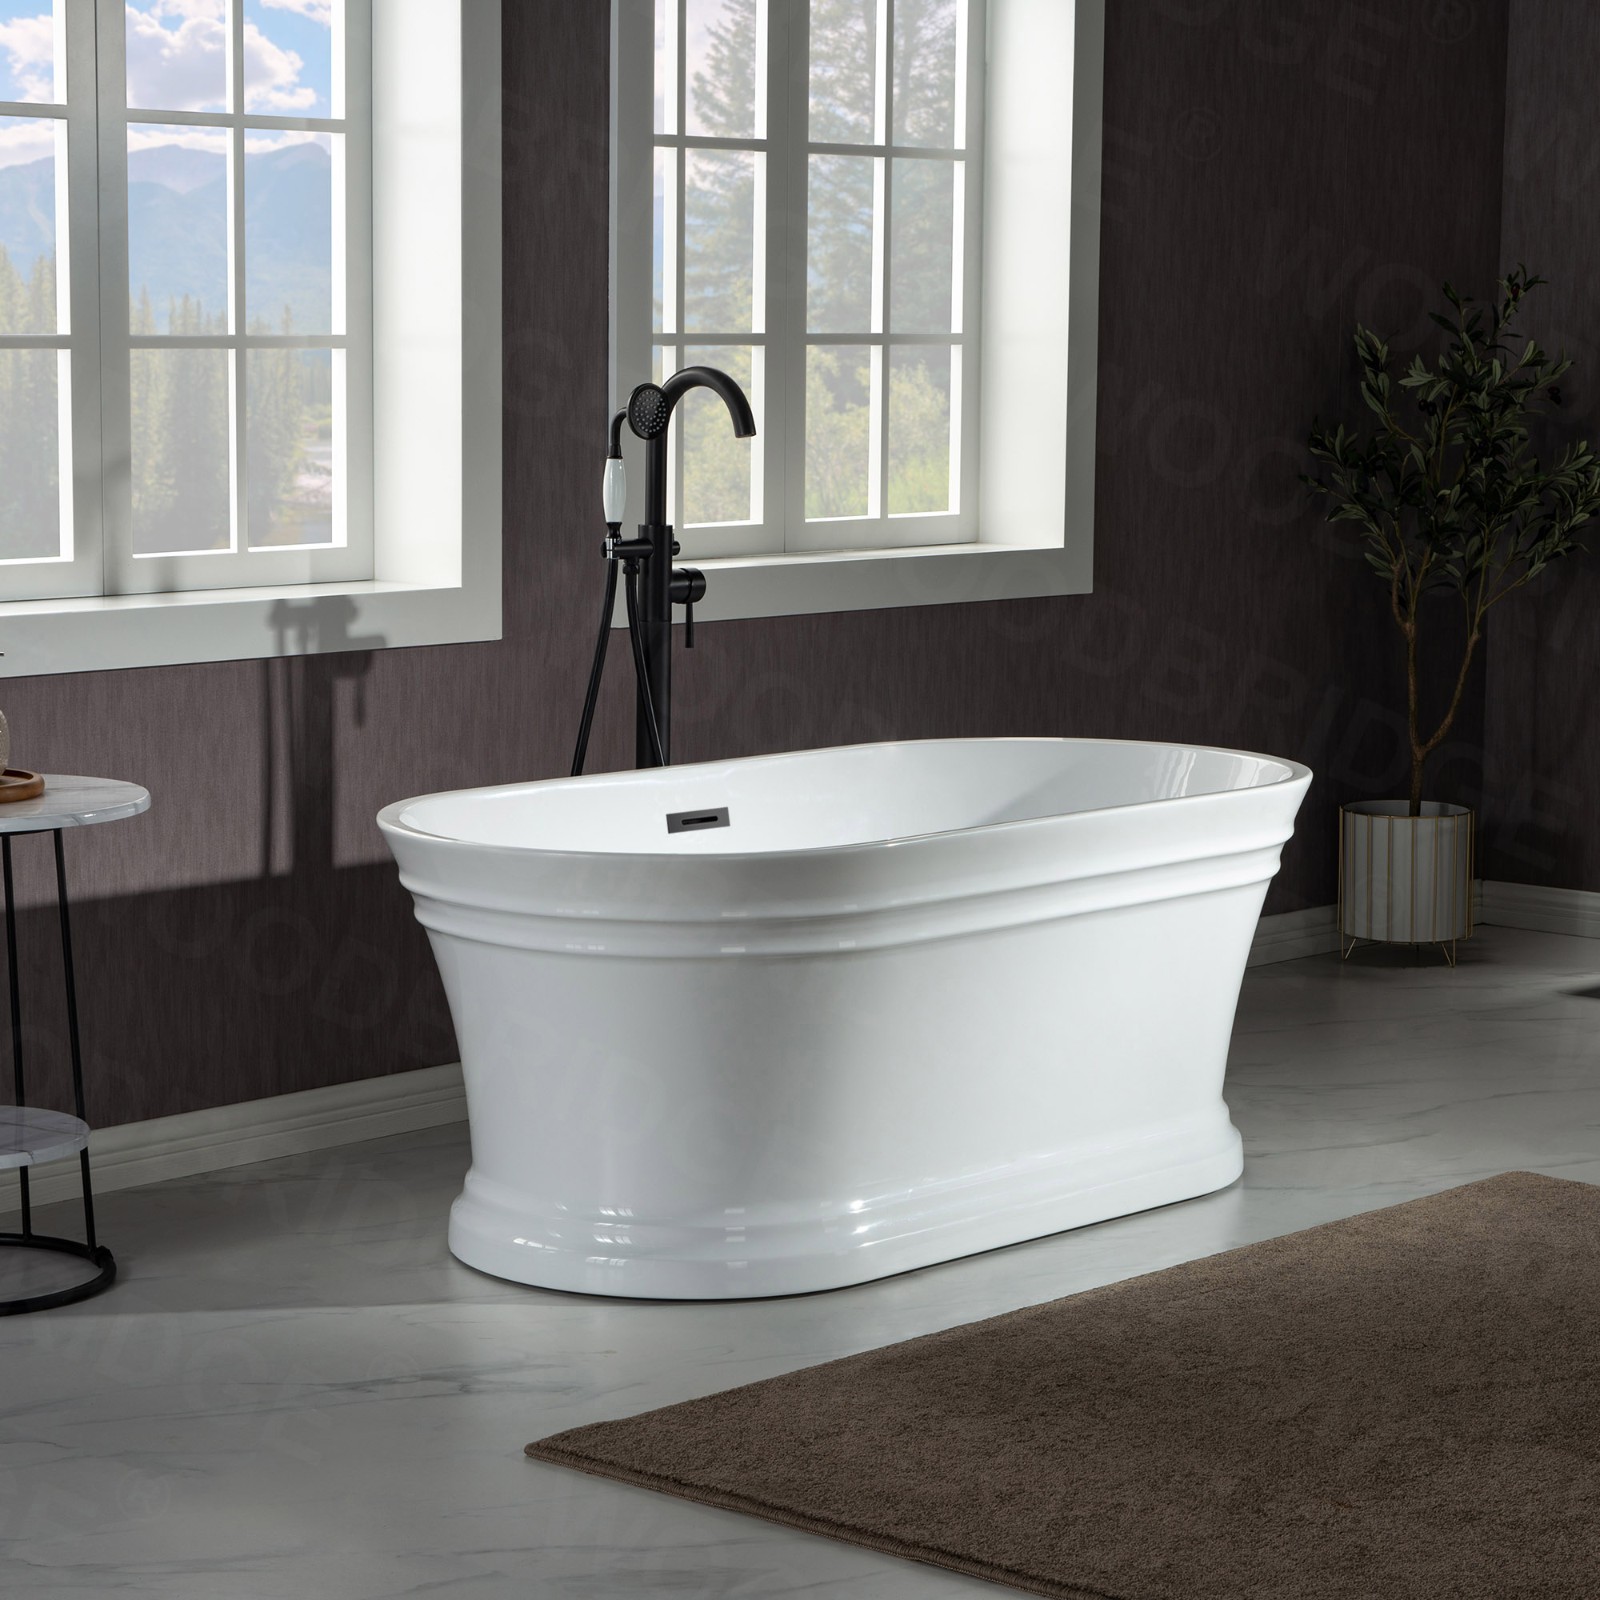  WOODBRIDGE 59 in. Freestanding Double Ended Acrylic Soaking Bathtub with Center Drain Assembly and Overflow, BTA1536/B1536, Glossy White_7806